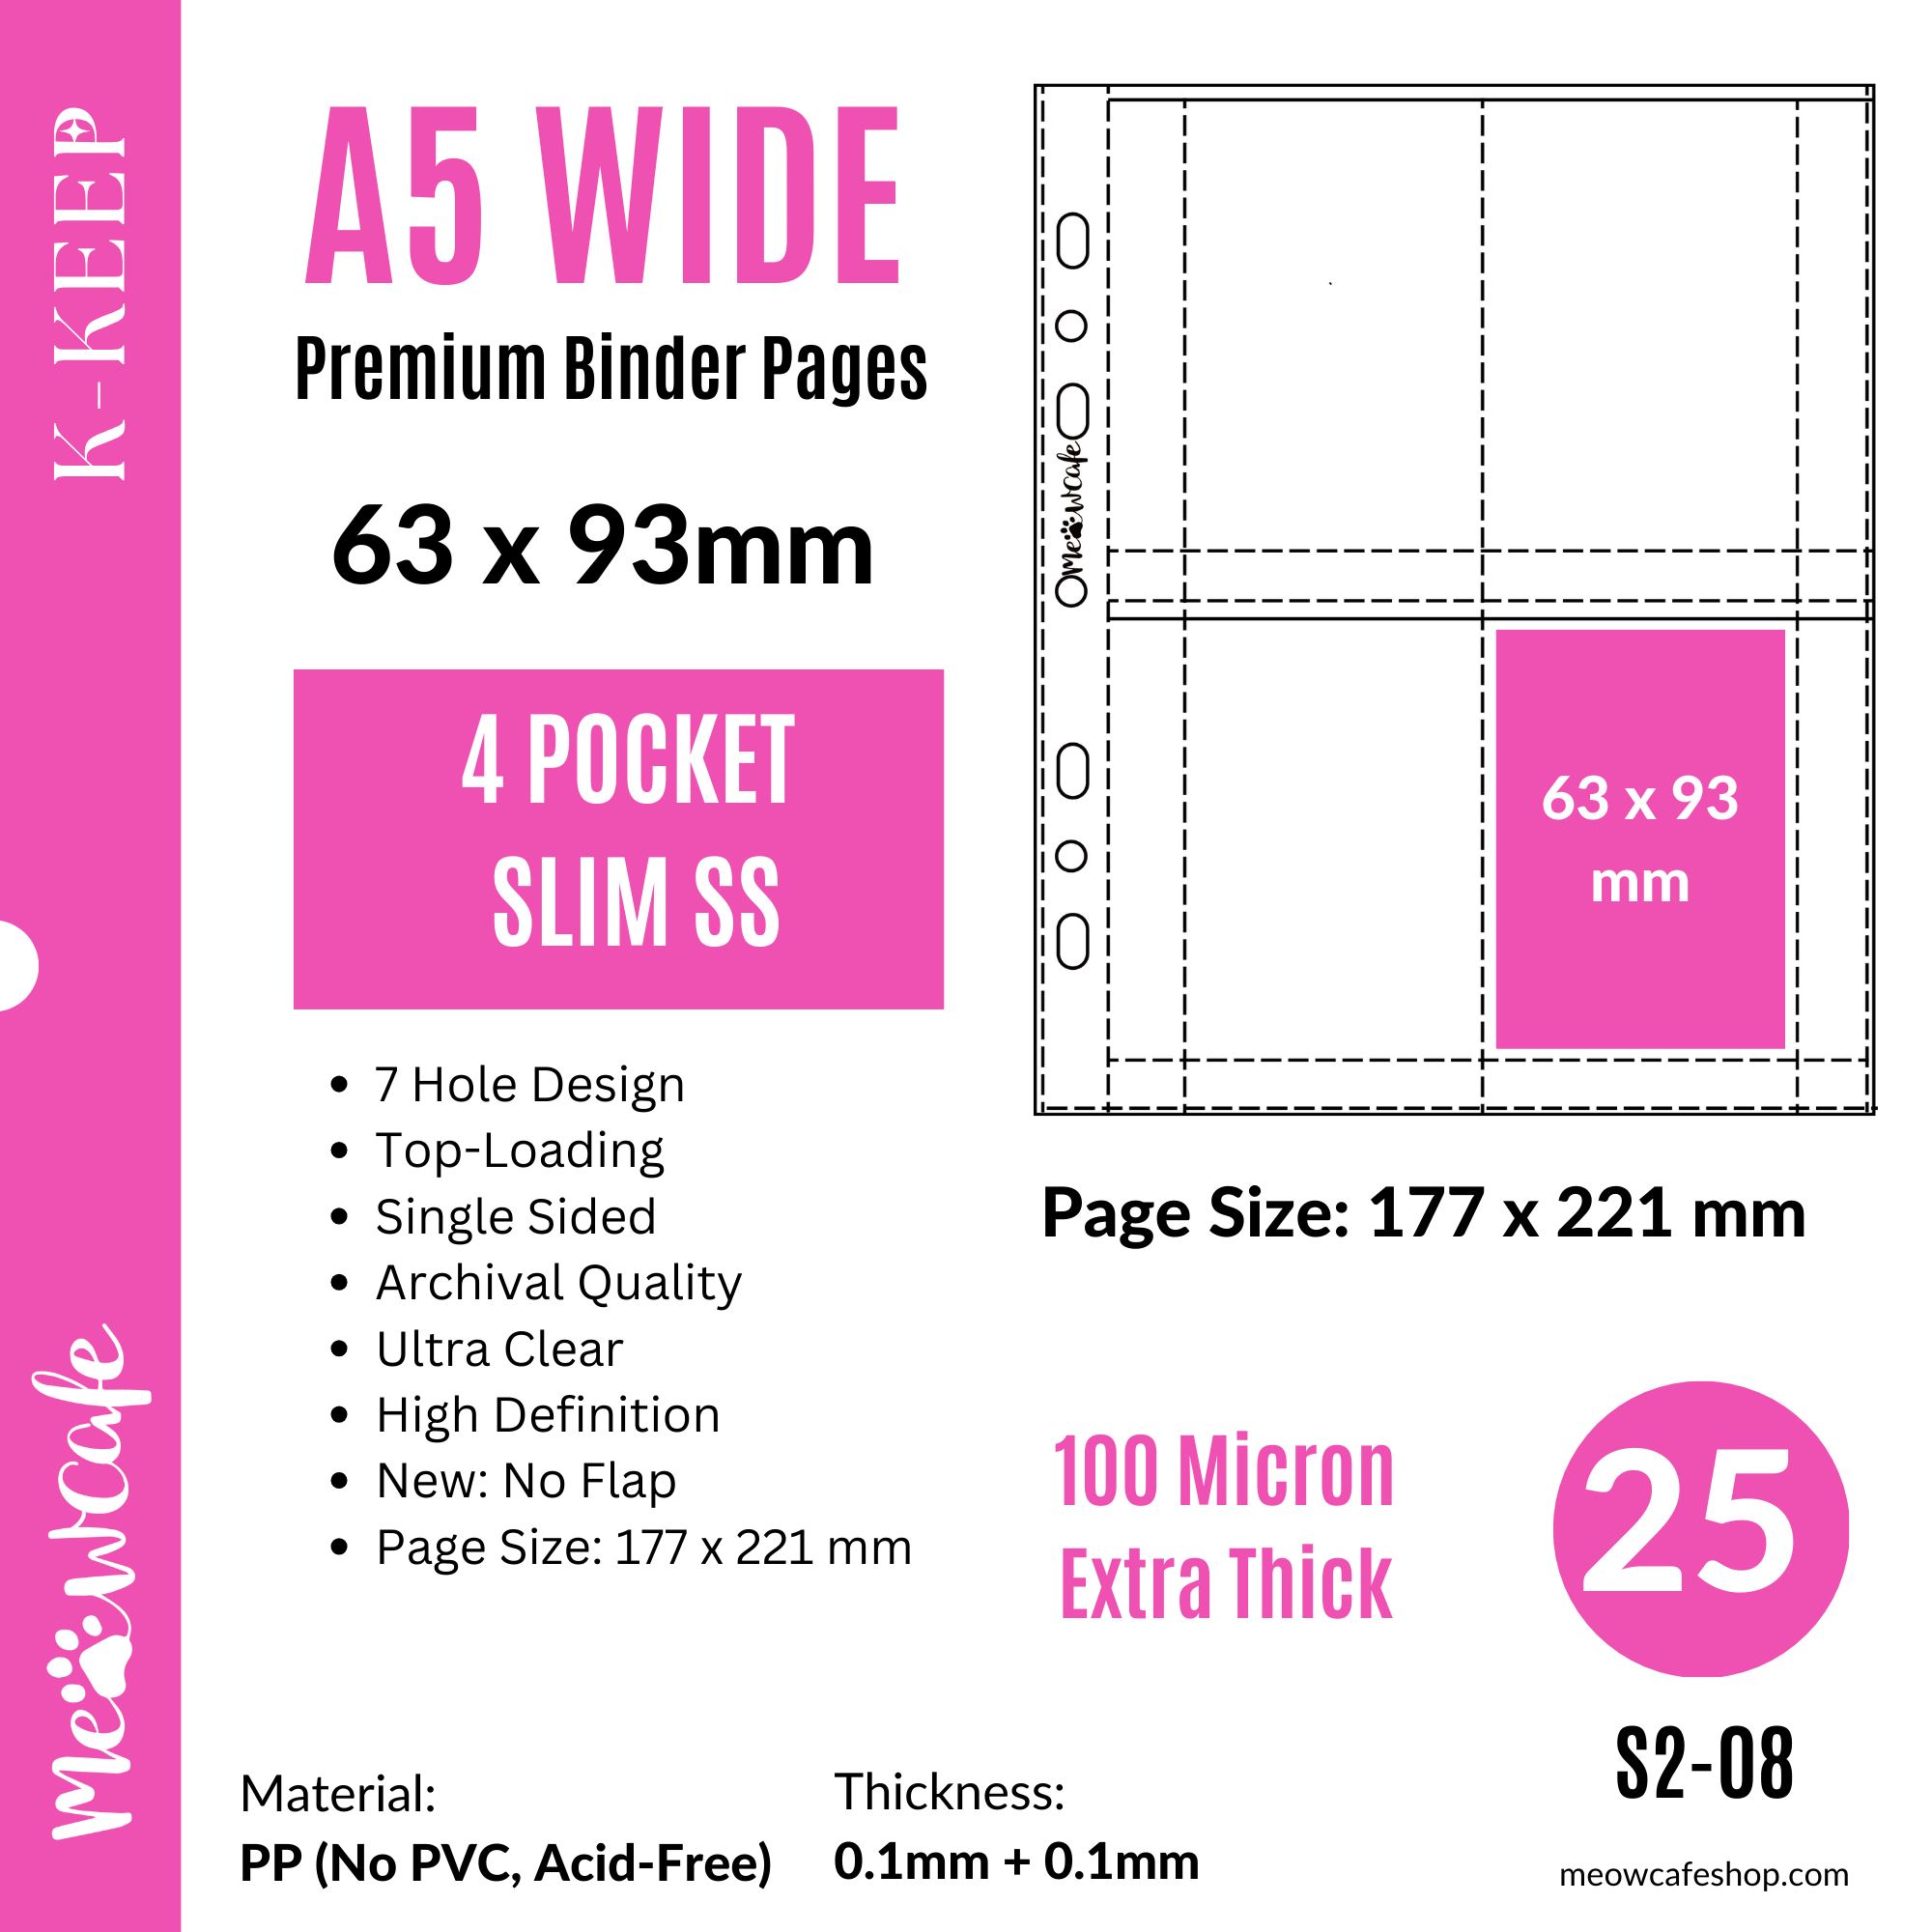 (Restock on March 20) K-KEEP [A5 Wide] -  4 Pocket Slim (63x93mm)- 7 Holes Premium Binder Pages, 100 Micron Thick, High Definition (Pack of 25)